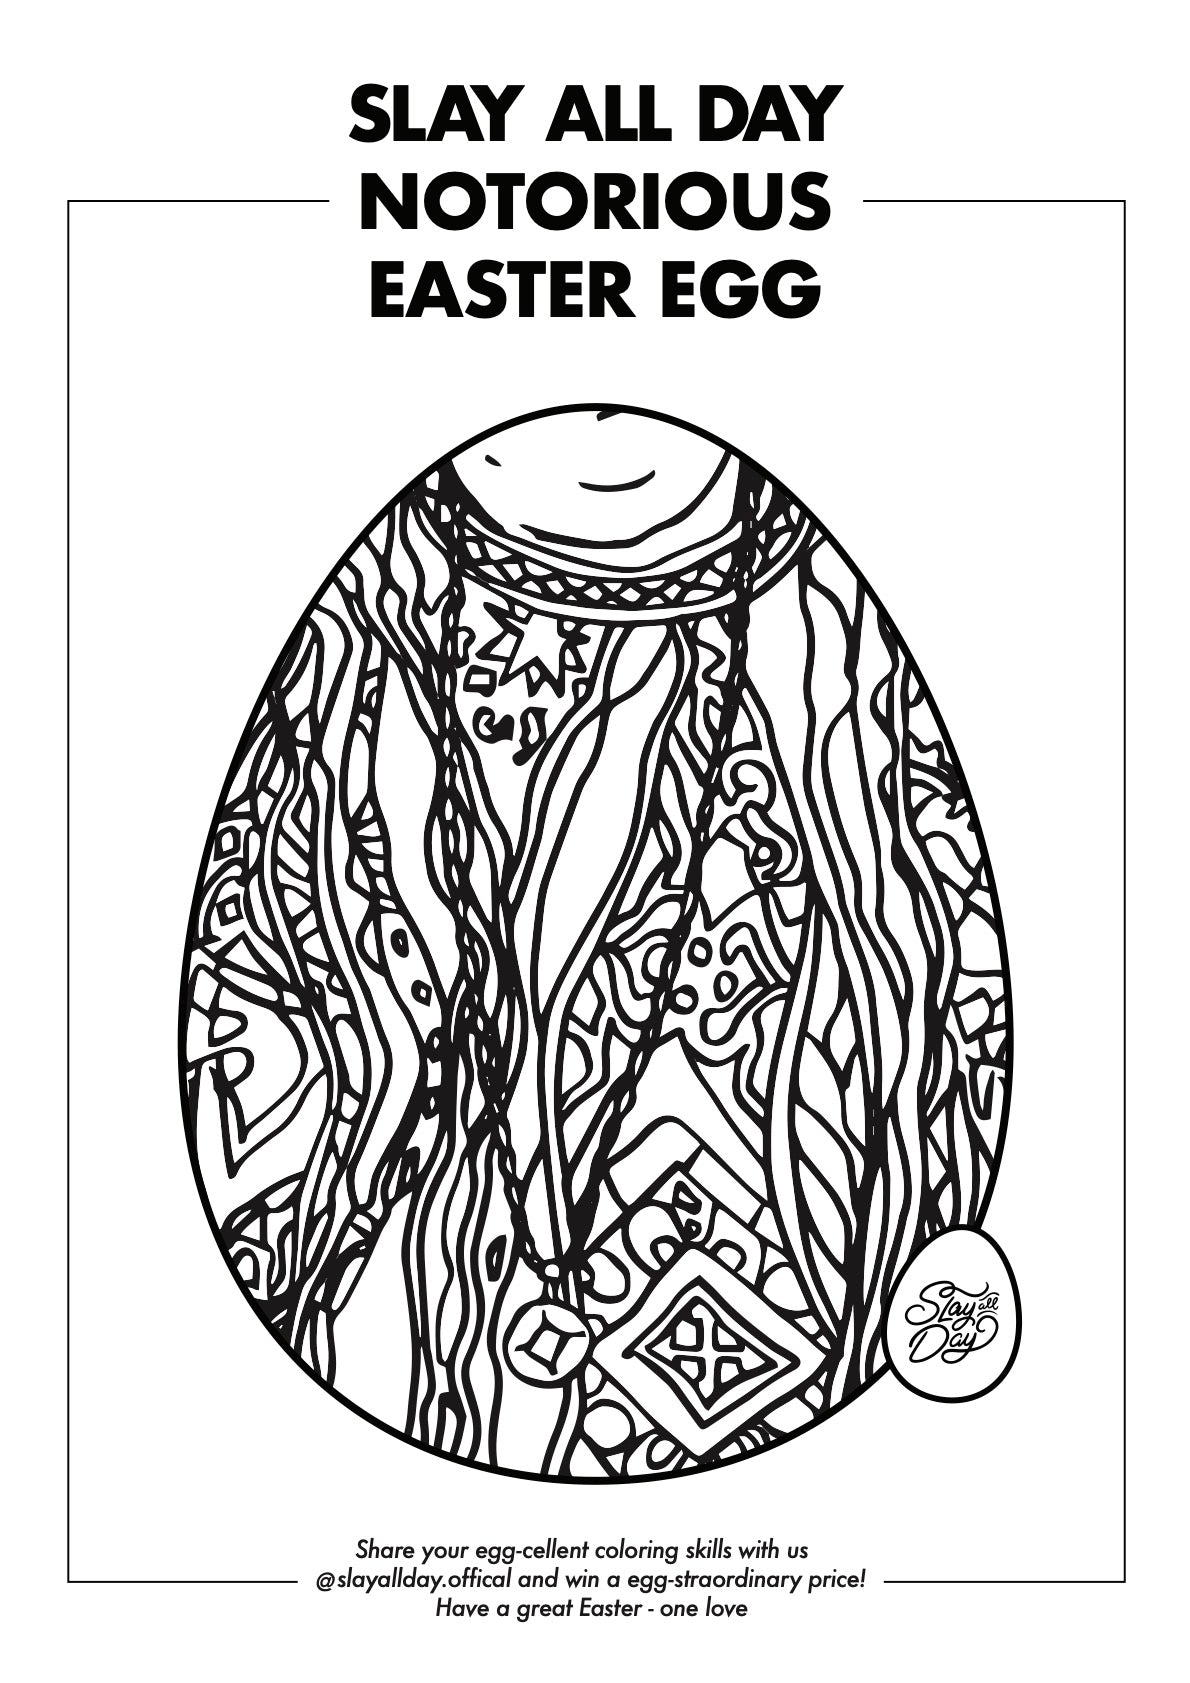 Notorious B.I.G. Easter egg - Coloring page